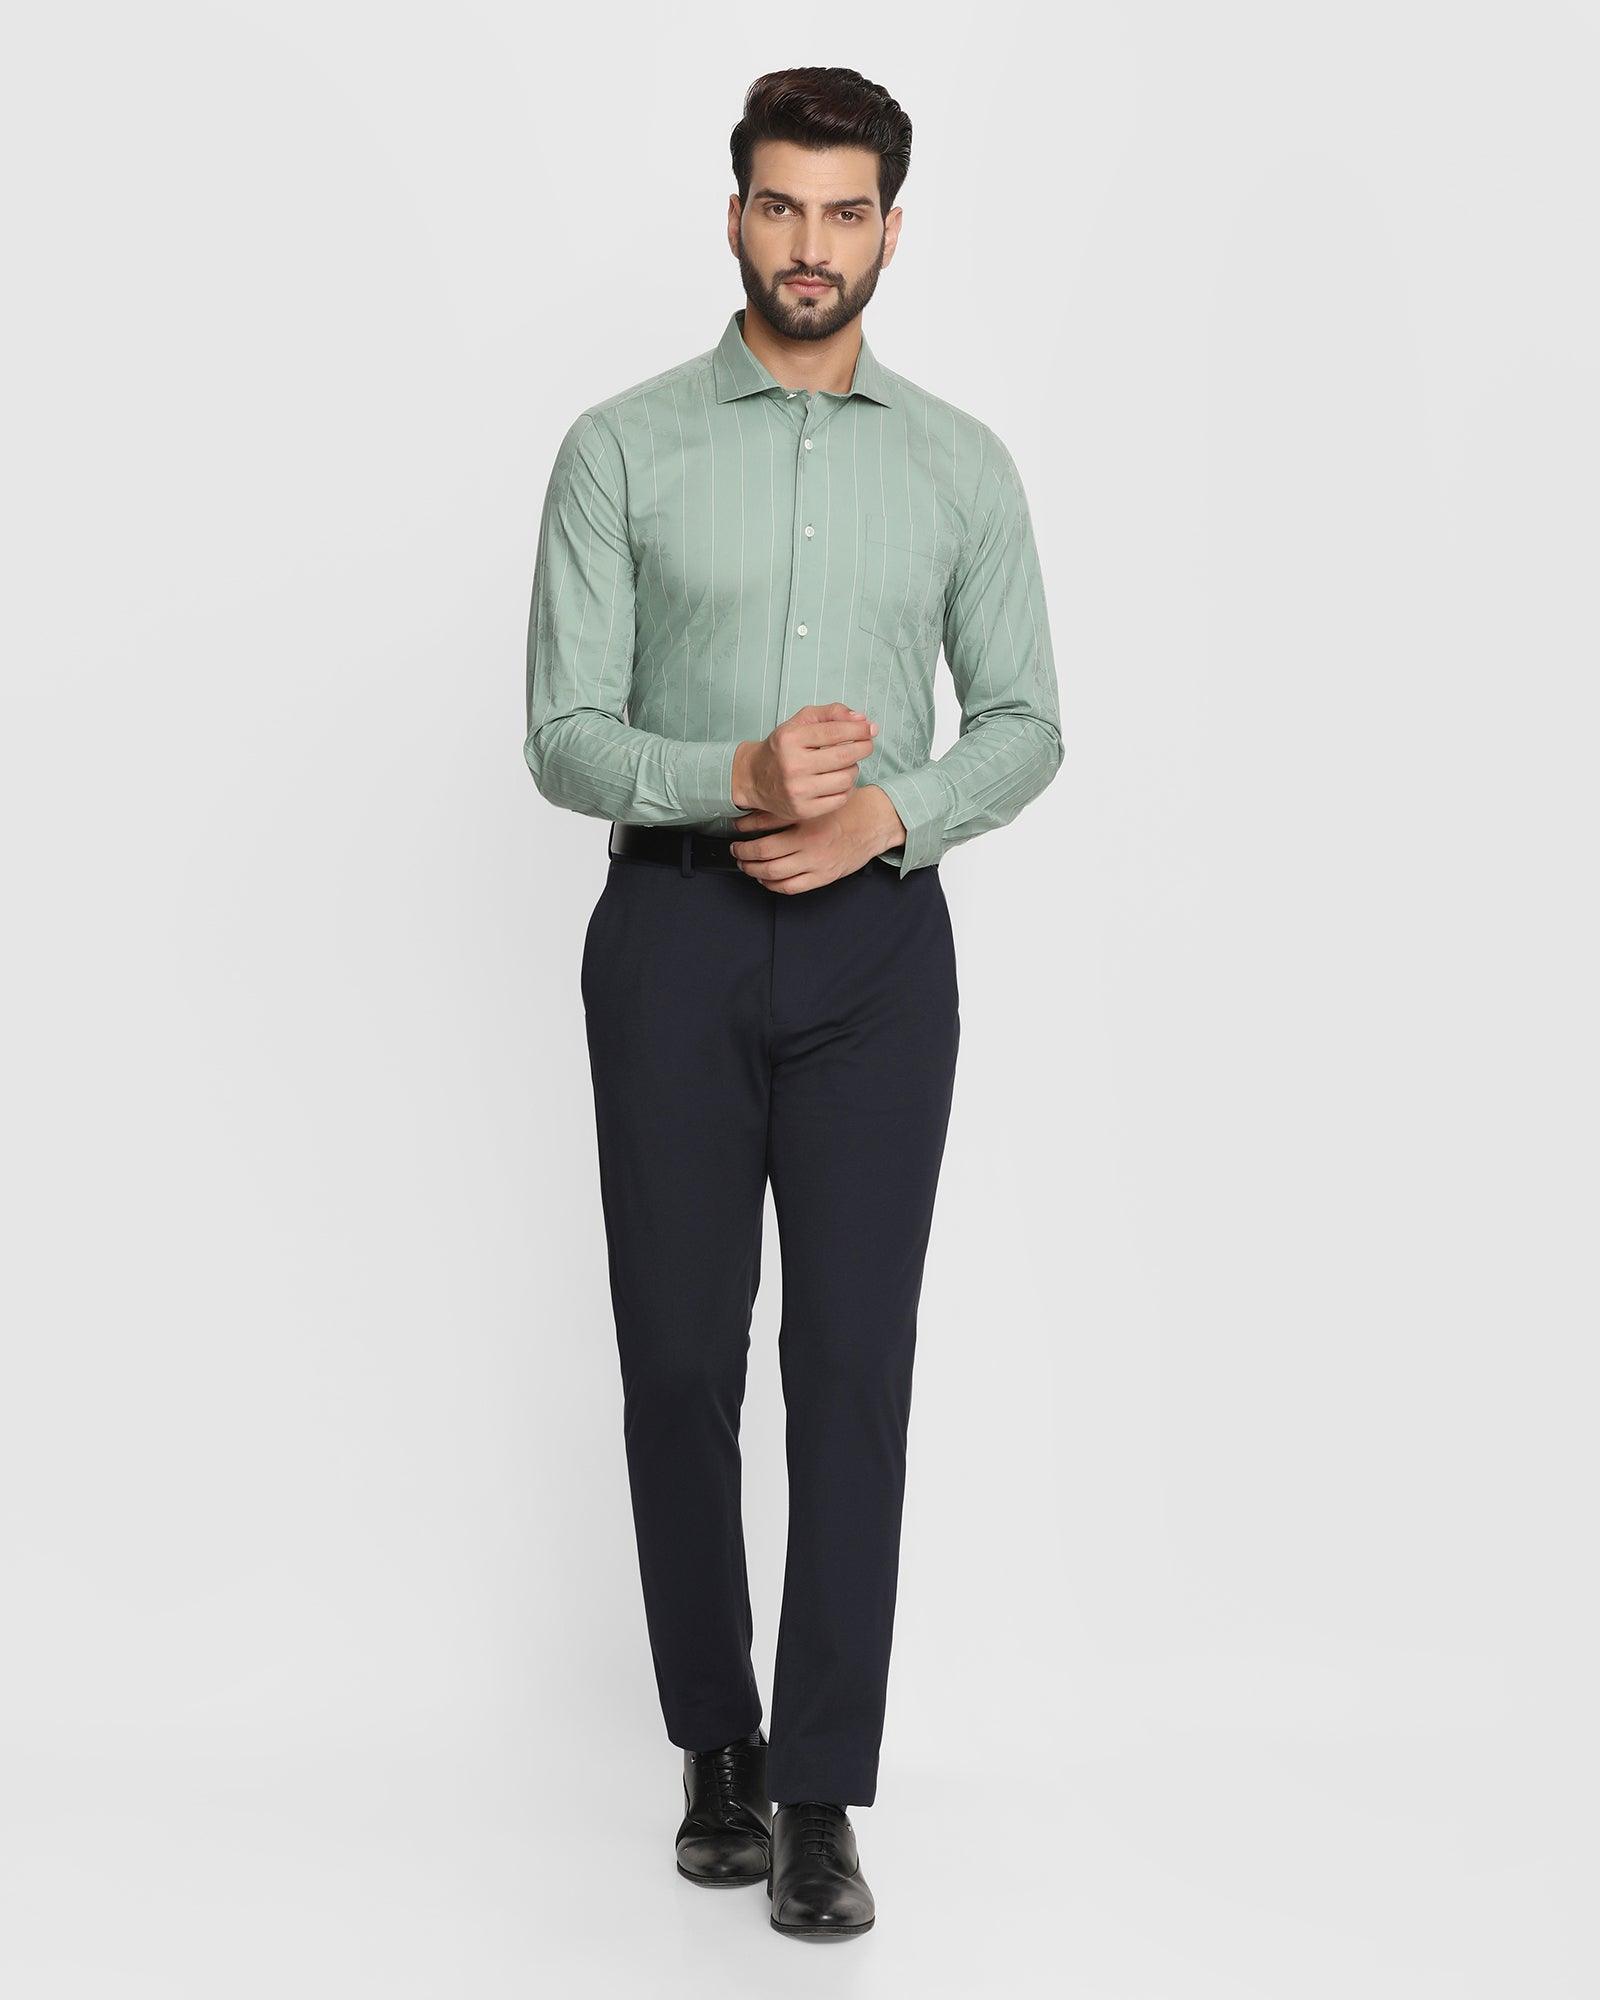 What colour shirt goes with grey pants  Portfolio